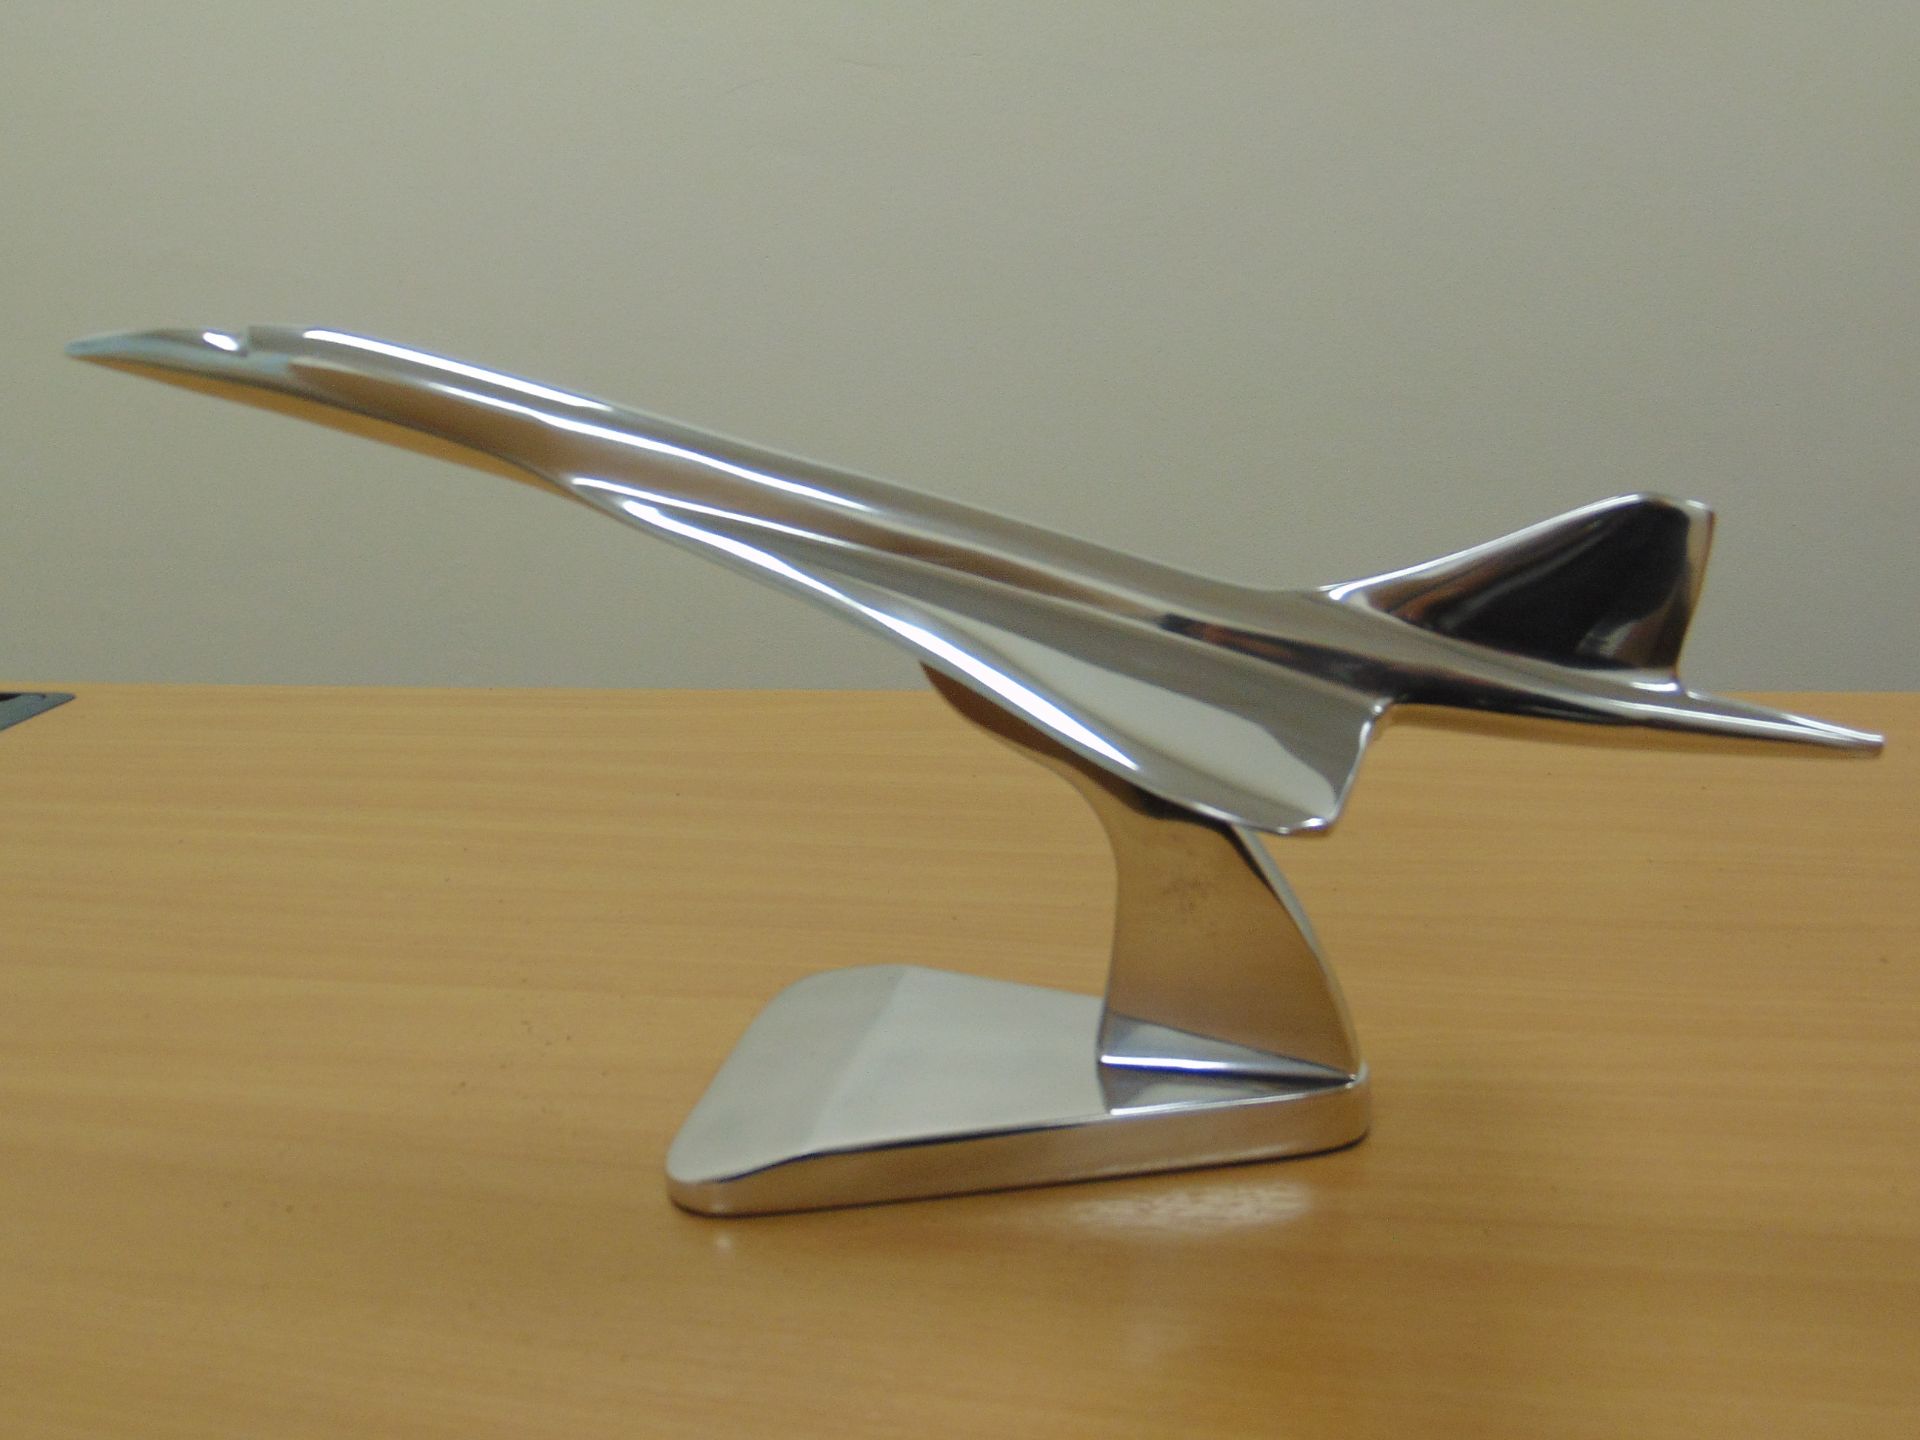 STUNNING POLISHED ALLUMINUM DESK TOP MODEL OF A CONCORD IN FLIGHT ON STAND